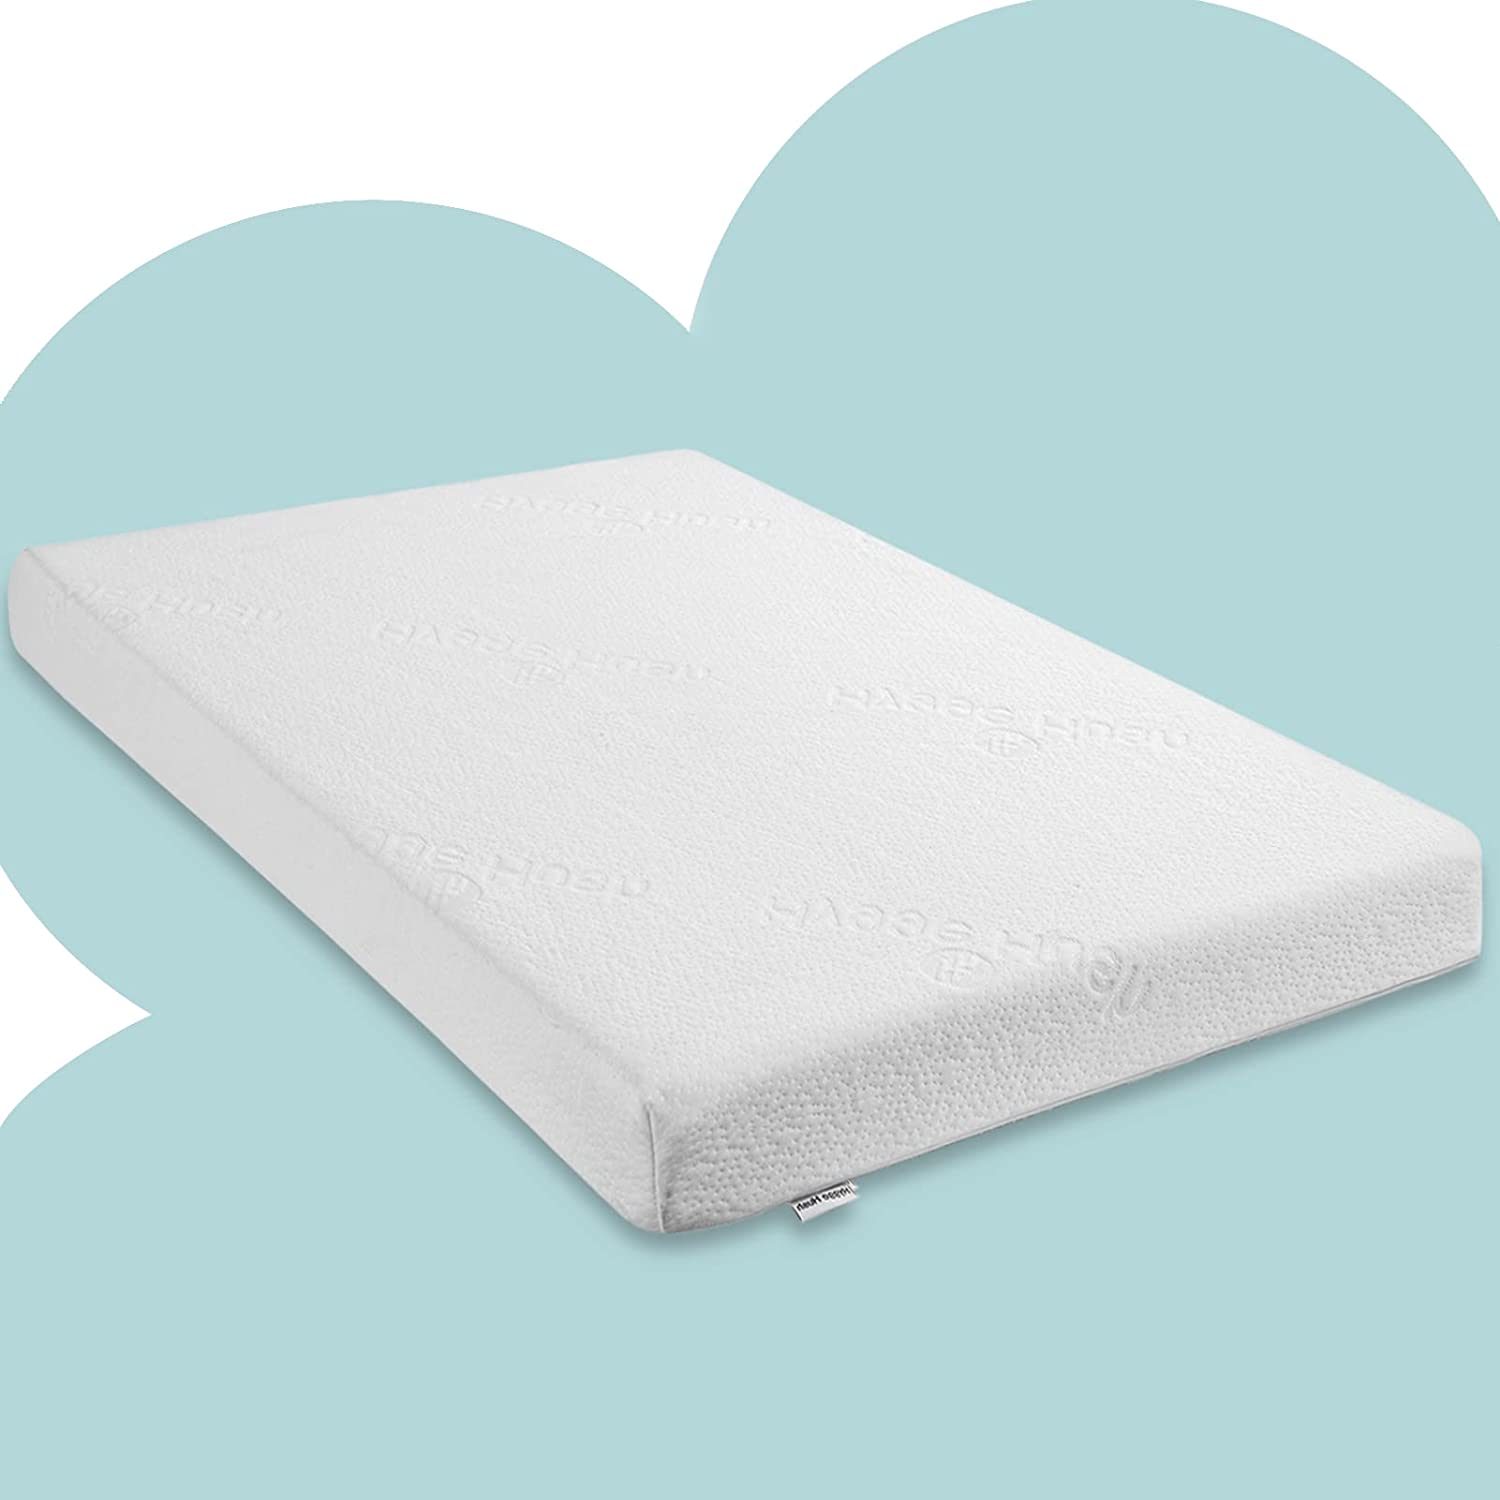 best pack n play mattress, hygge hush pack and play mattress